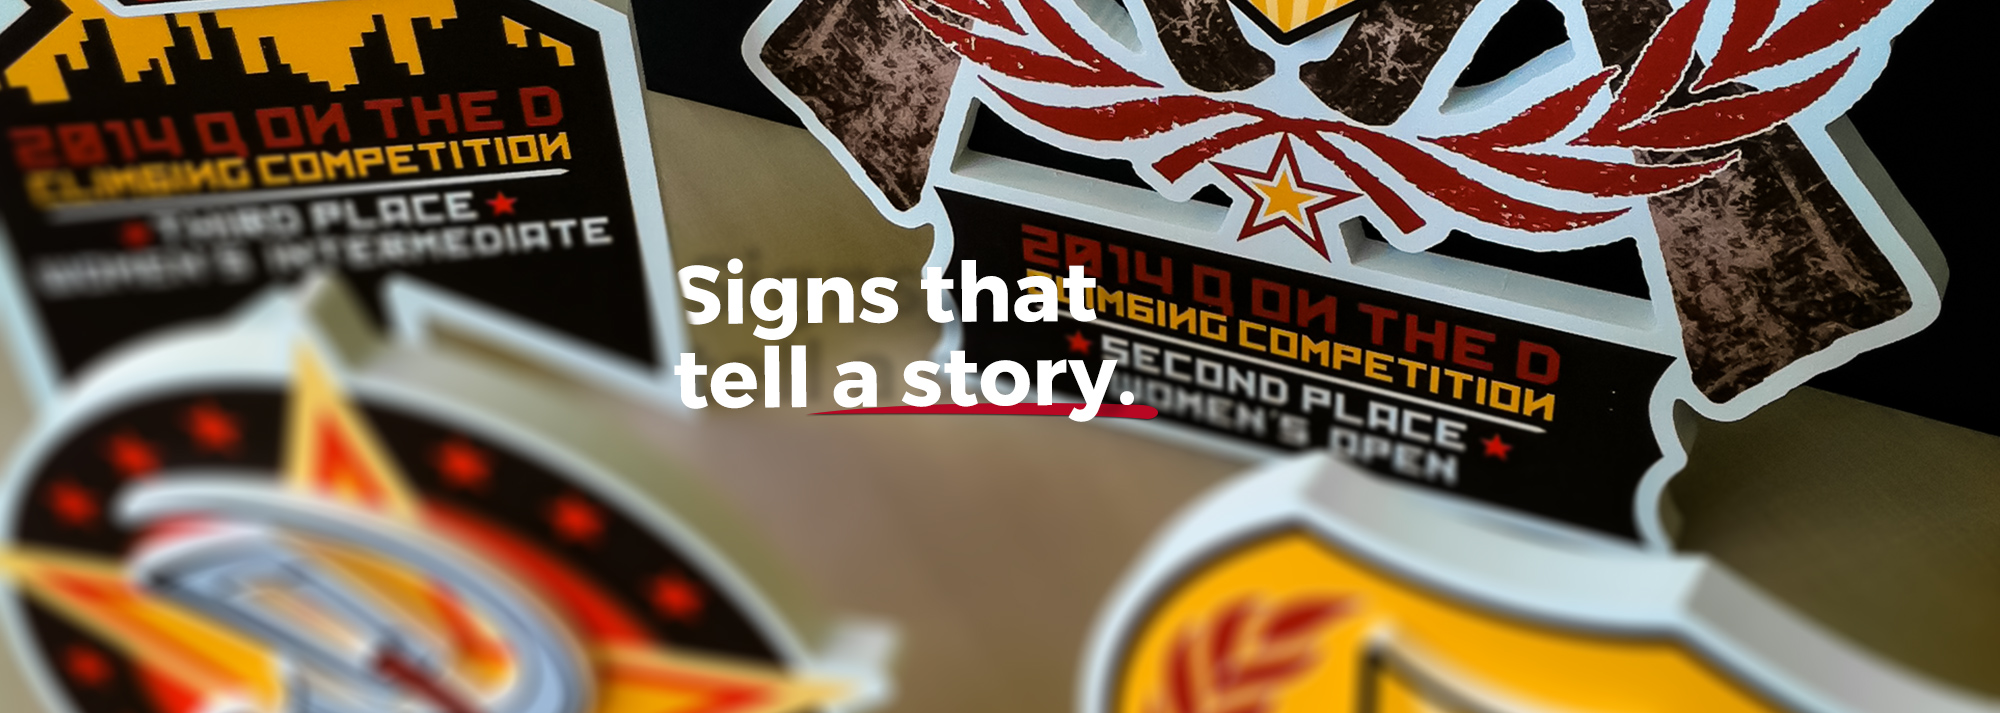 Signs that tell a story for every event and need